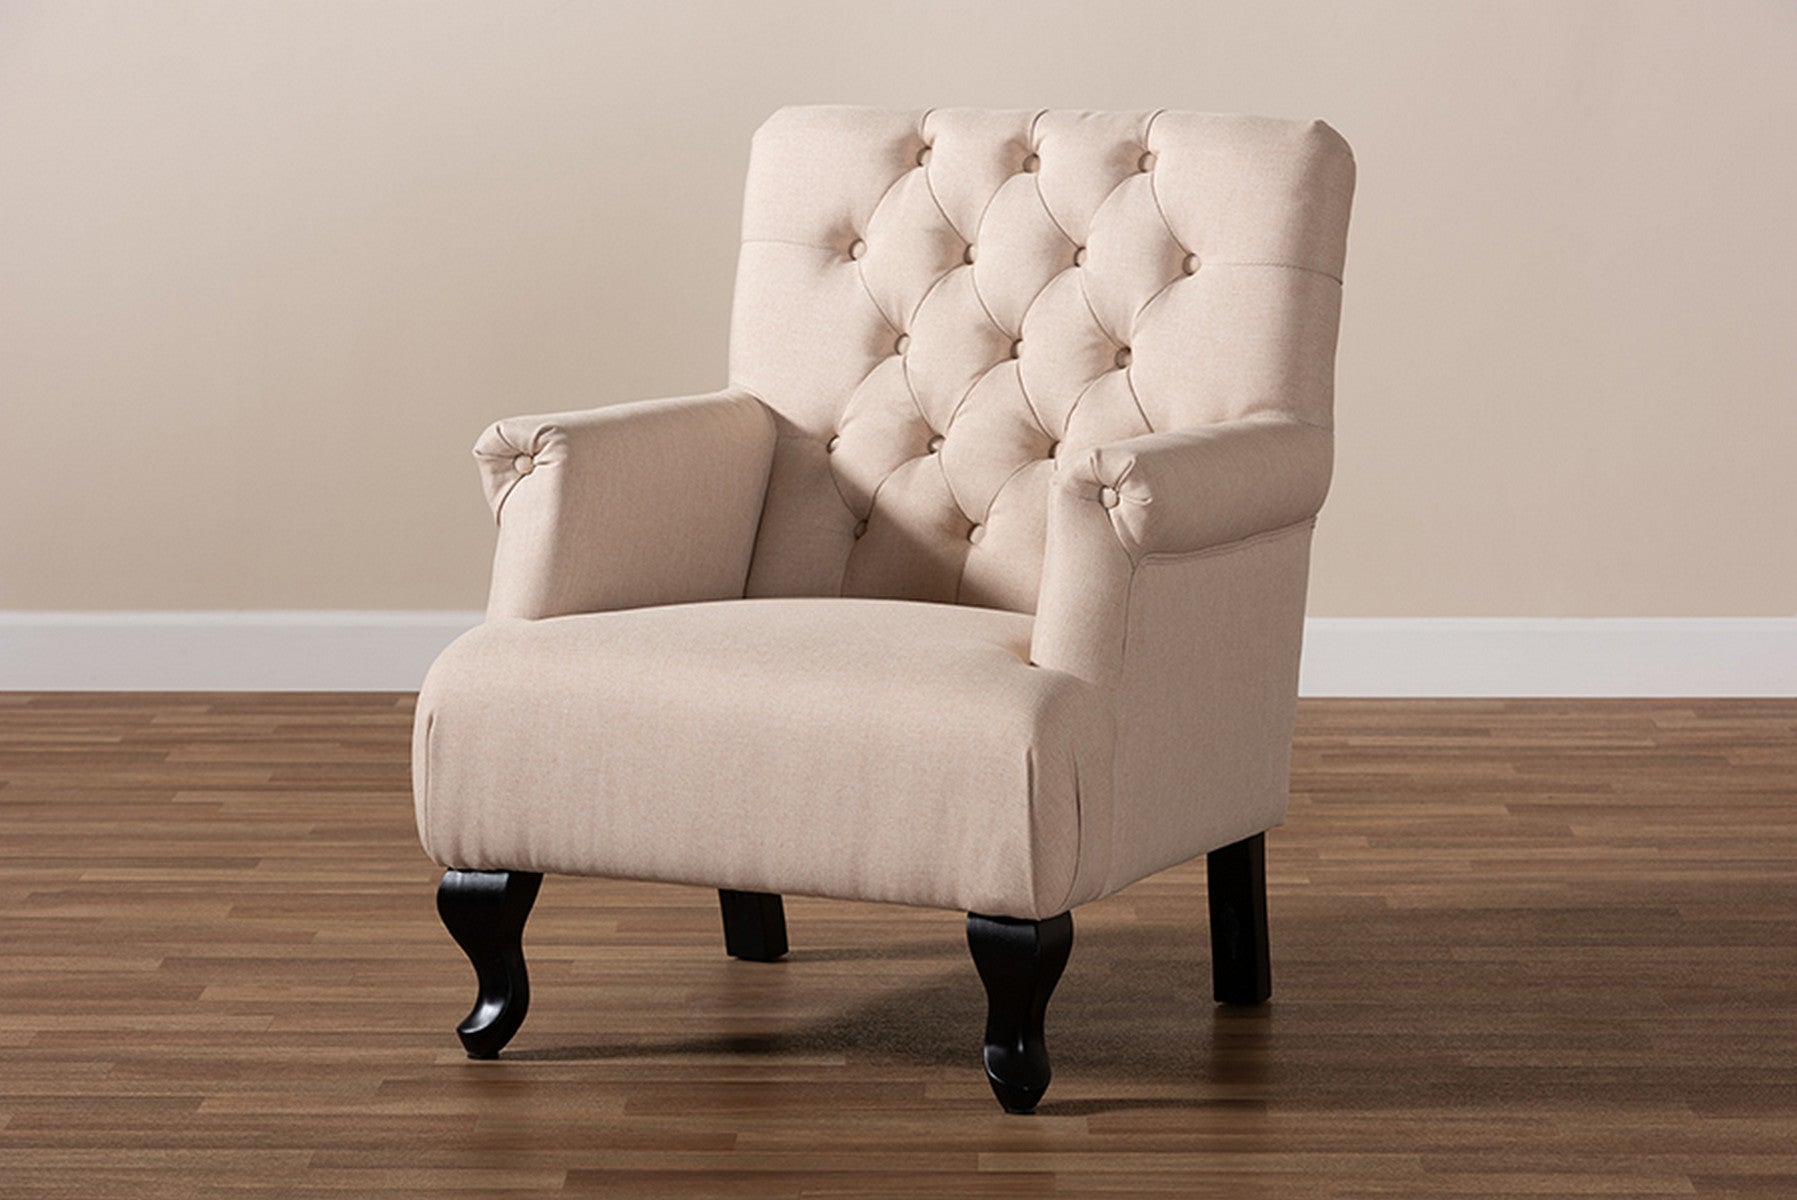 Baxton Studio Belan Classic and Traditional Beige Fabric Upholstered Button Tufted Armchair